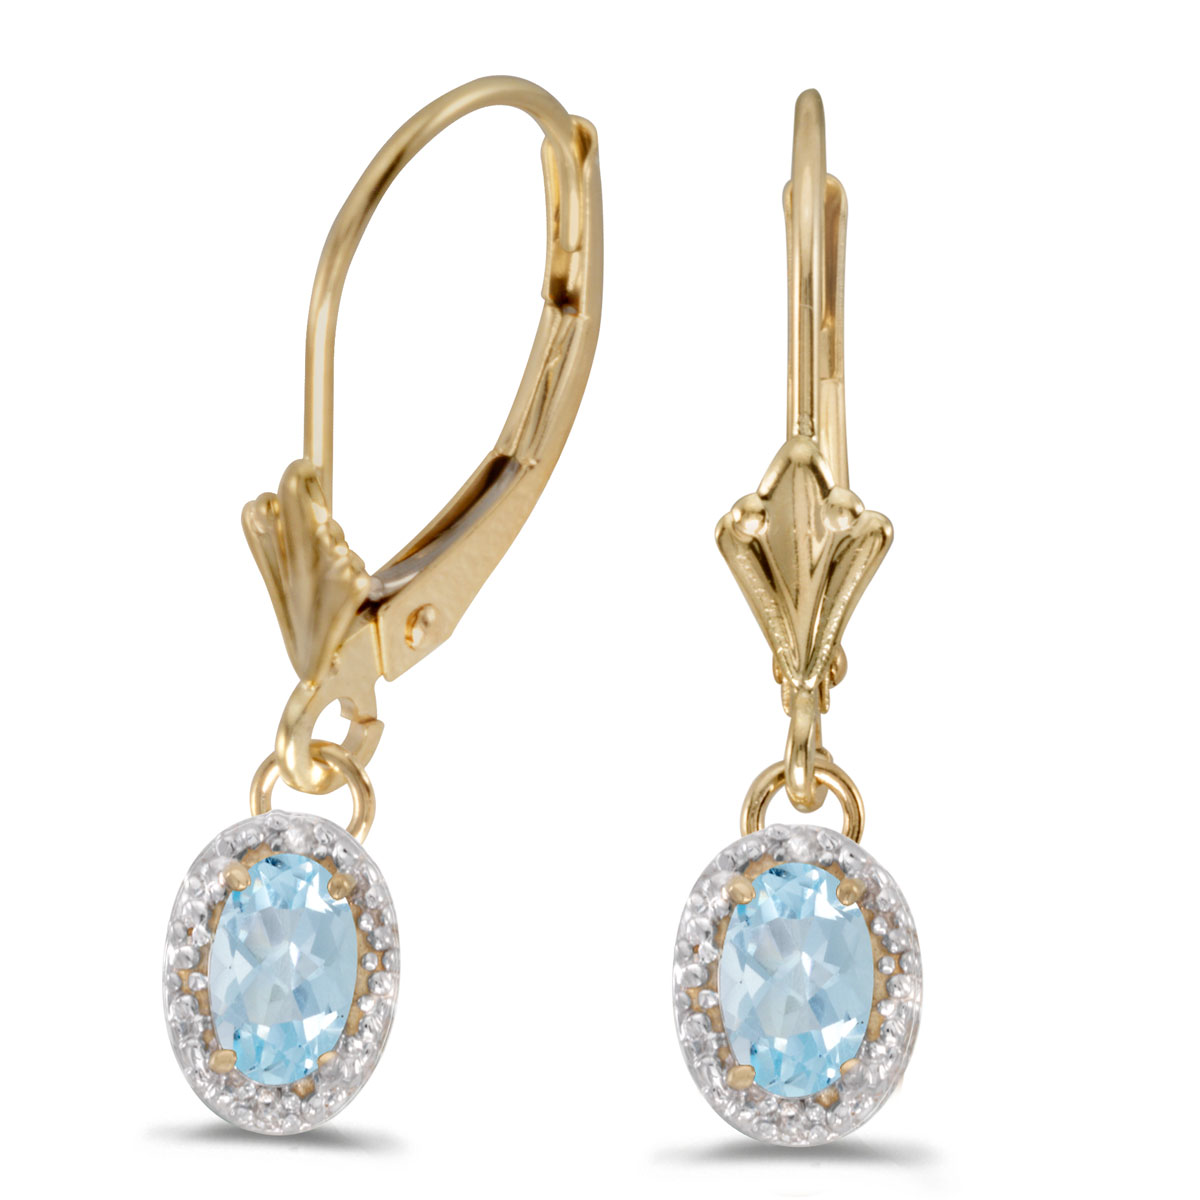 JCX2111: Beautiful 10k yellow gold leverback earrings with stunning 6x4 mm aquamarines complemented with bright diamonds.